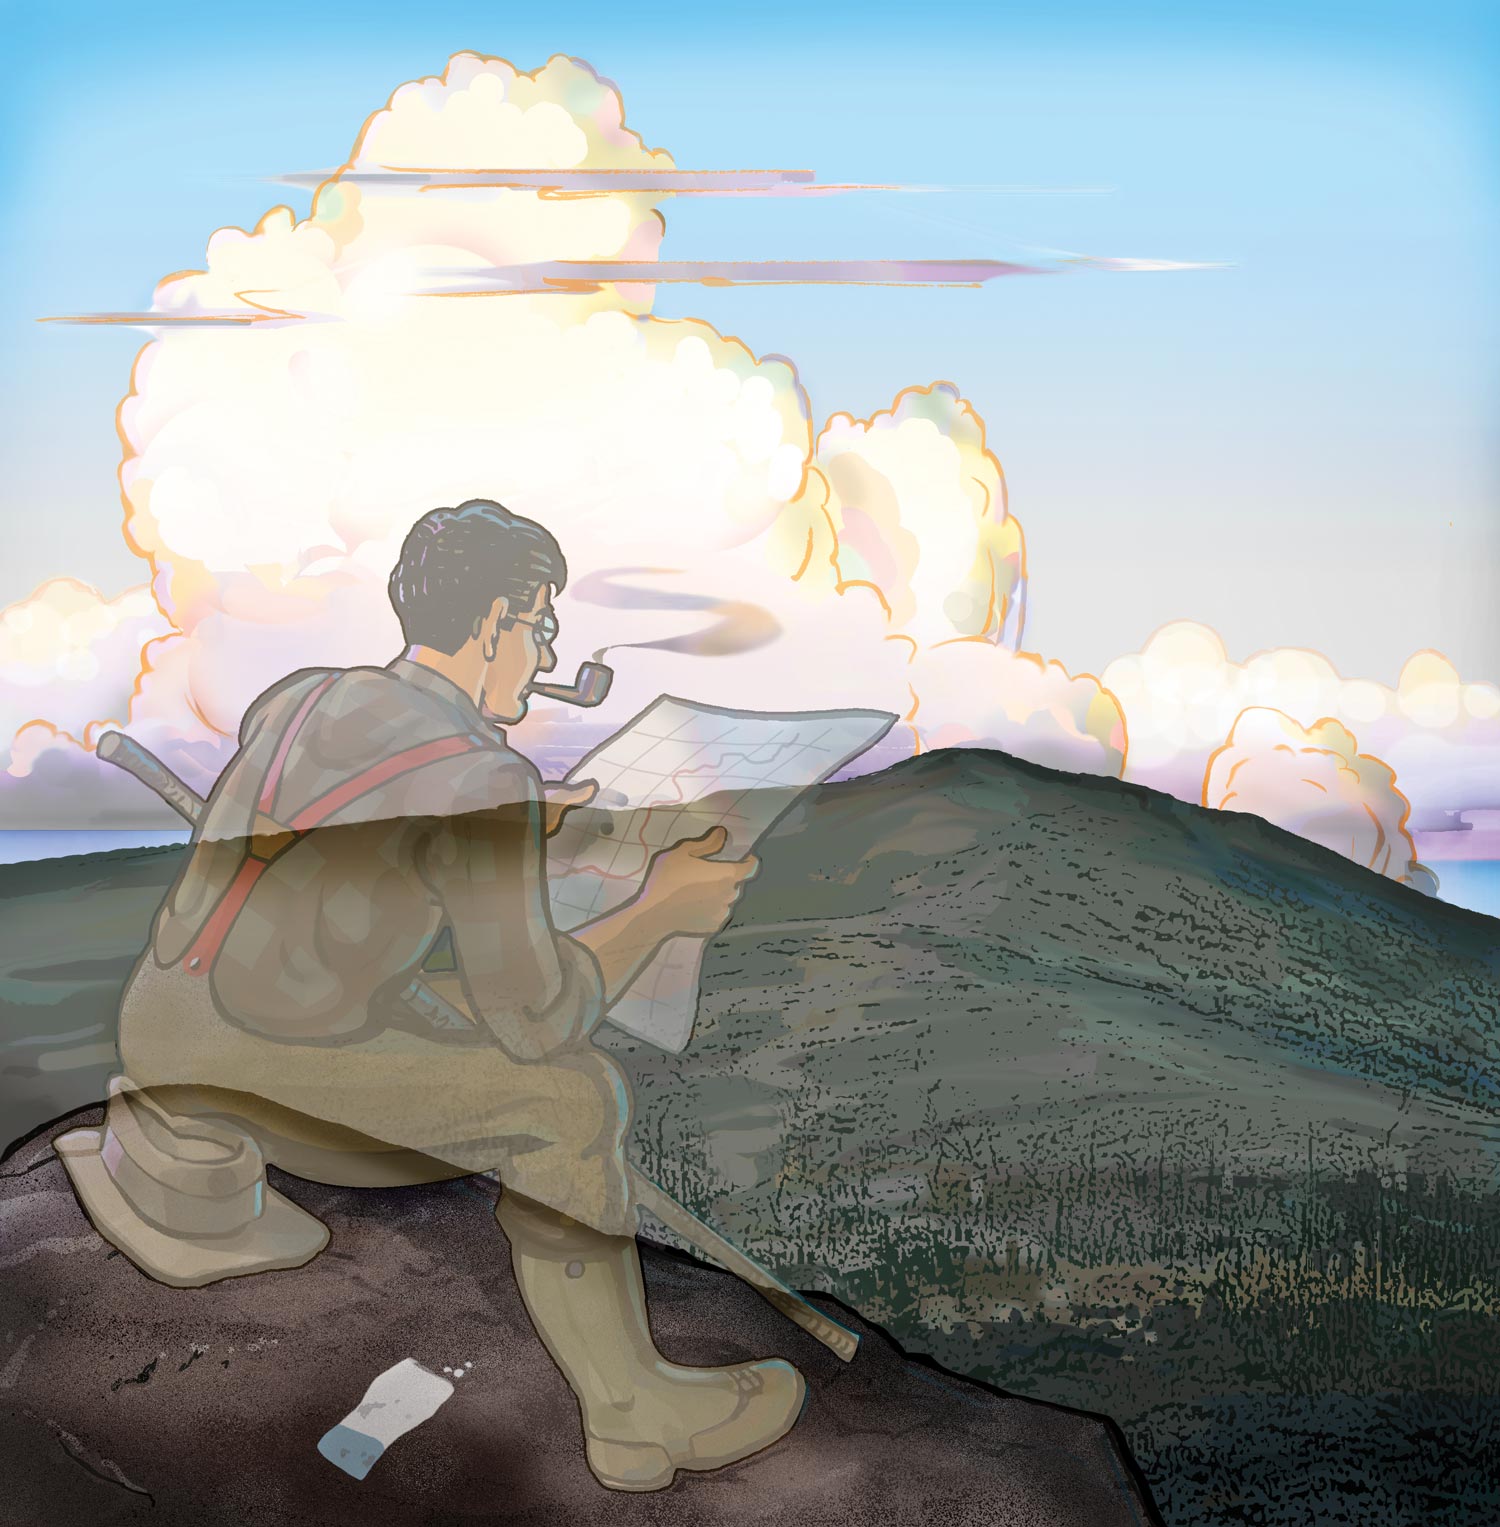 digital illustration of a man sitting overlooking the mountains